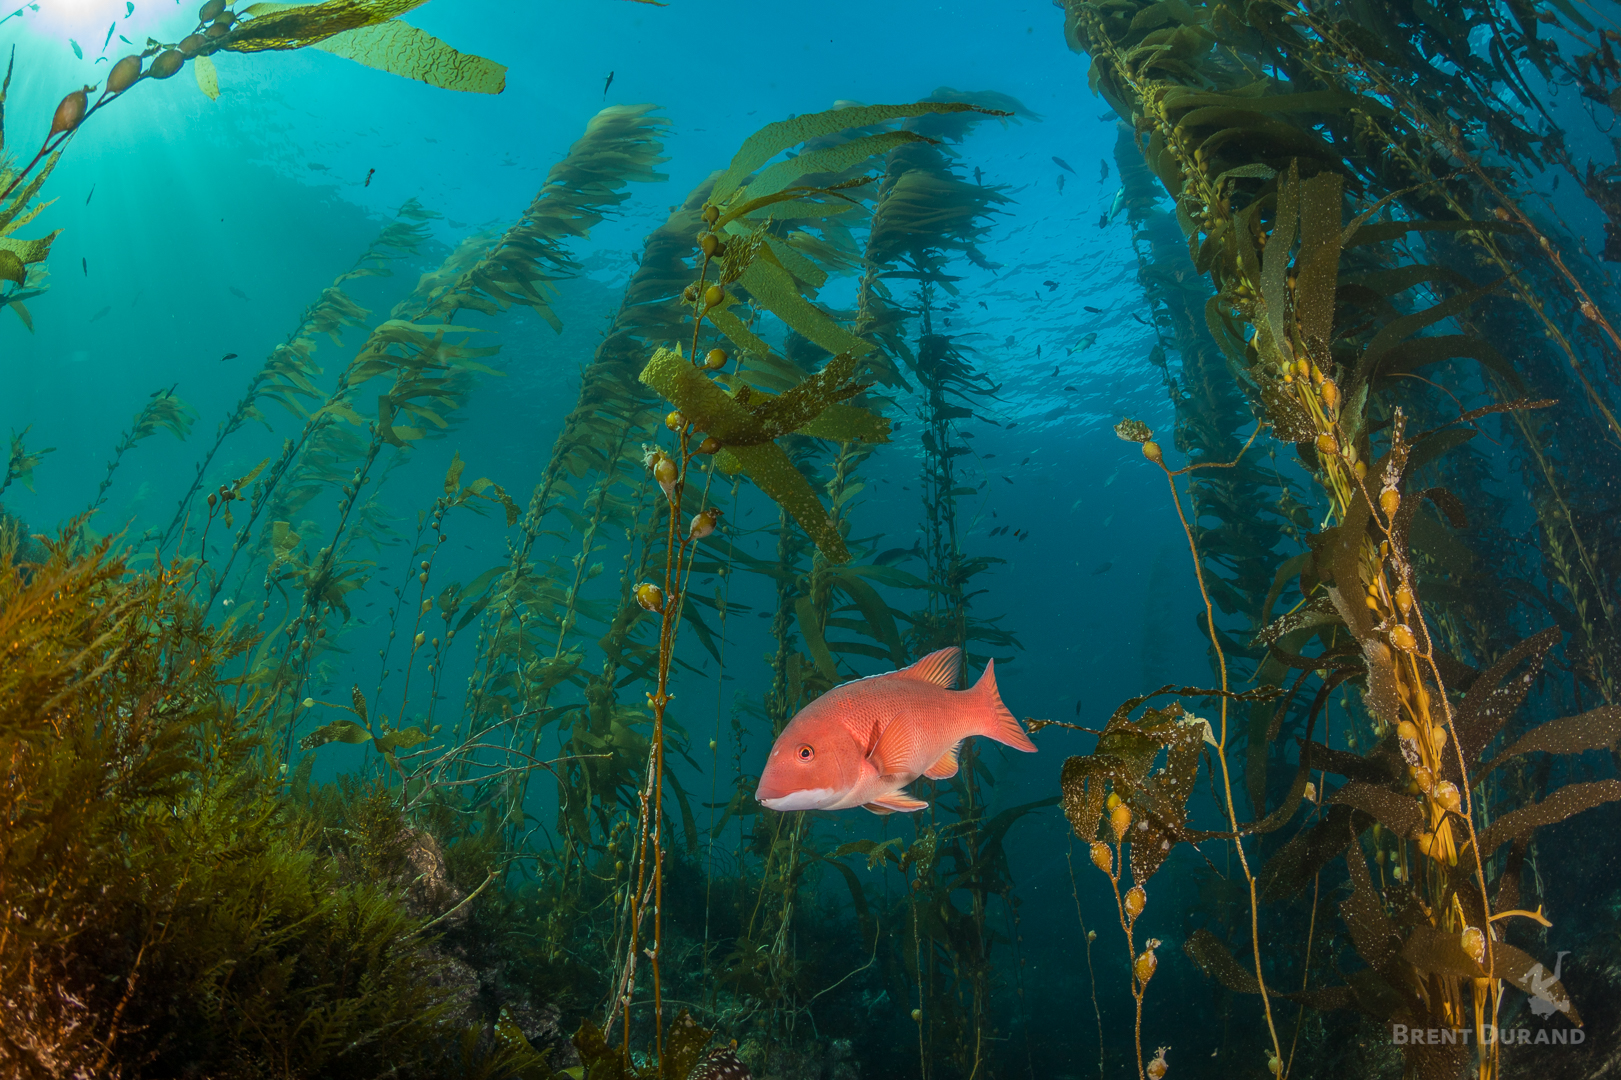 California Kelp Forest at Anacapa Island, United States by Brent Durand